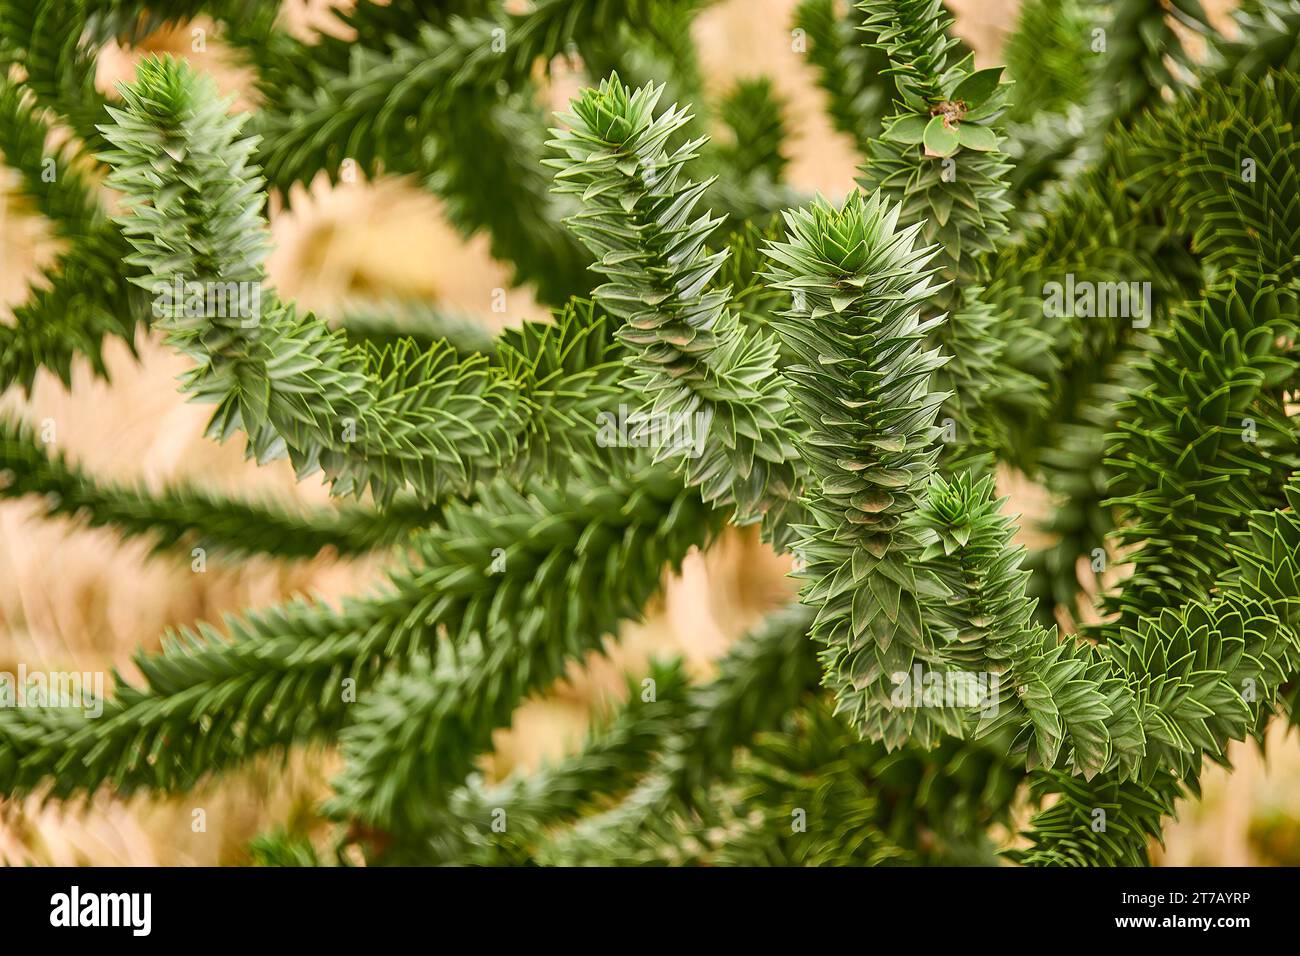 Araucaria araucana (monkey puzzle tail tree, or Chilean pine) is an evergreen tree. It is native to central and southern Chile, western Argentina. Stock Photo